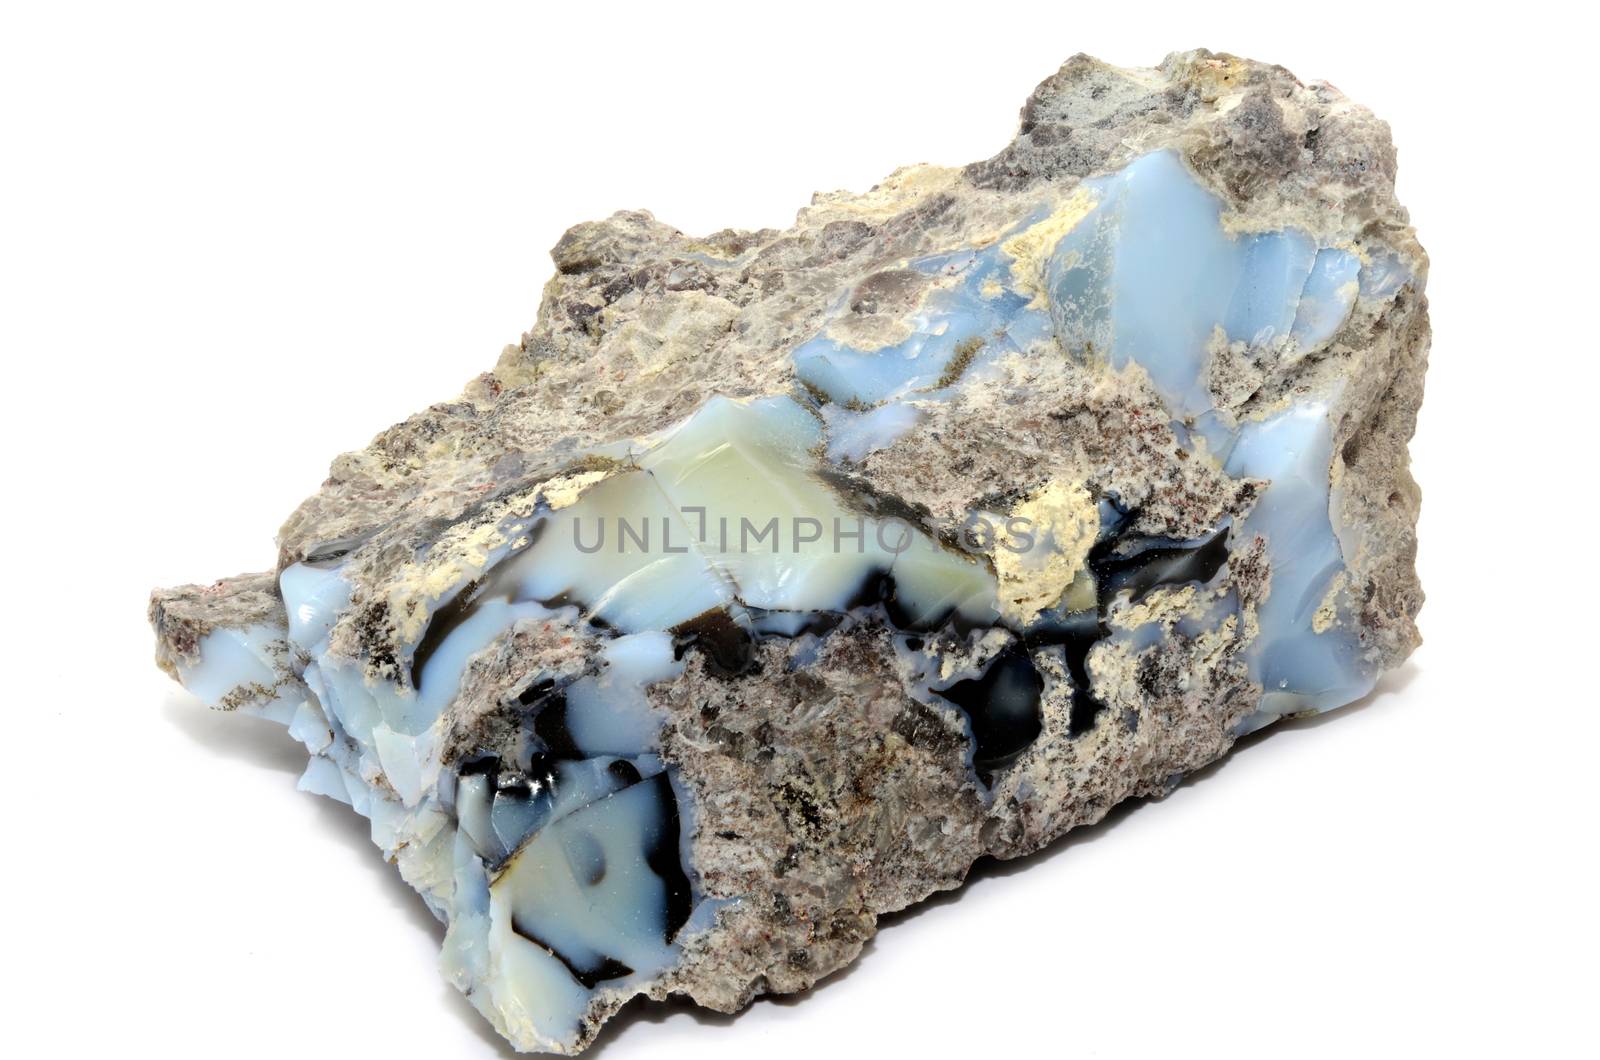 Sample of a beautiful Blue Opal nature specimen isolated on white background